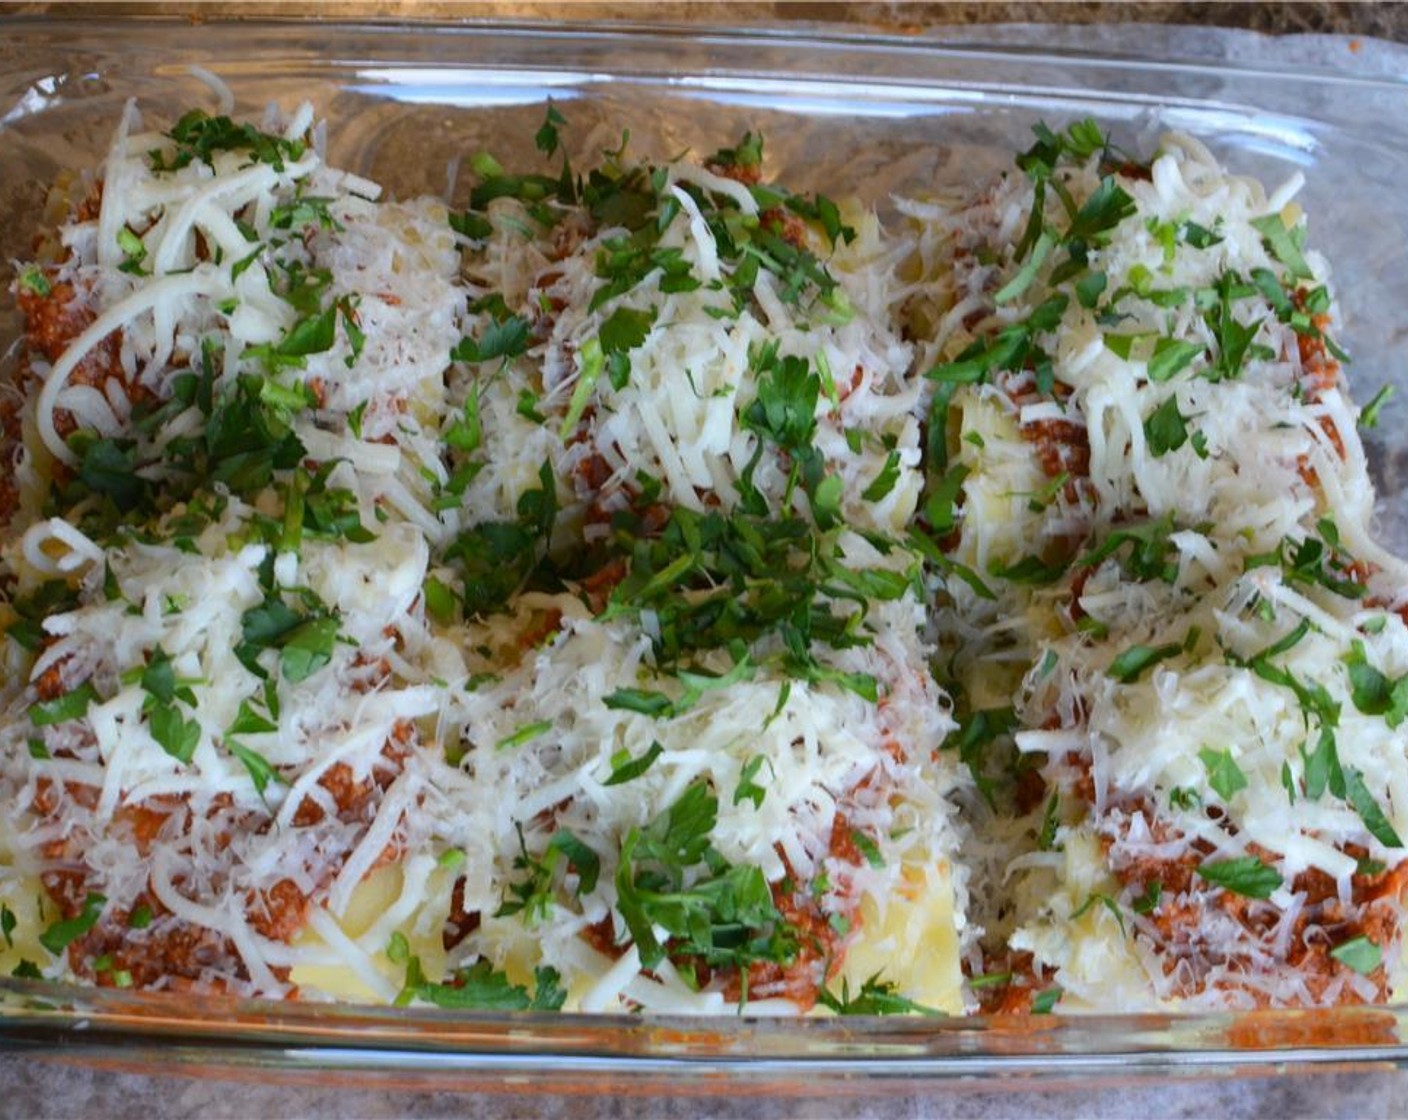 step 14 Spread the remaining Mozzarella Cheese (1/2 cup), Parmesan Cheese (1/2 cup), and Italian Flat-Leaf Parsley (1 handful) evenly over the top. Cover the dish with foil making sure it's not touching the cheese at all and bake at 375 degrees F (190 degrees F) for 35-40 minutes.